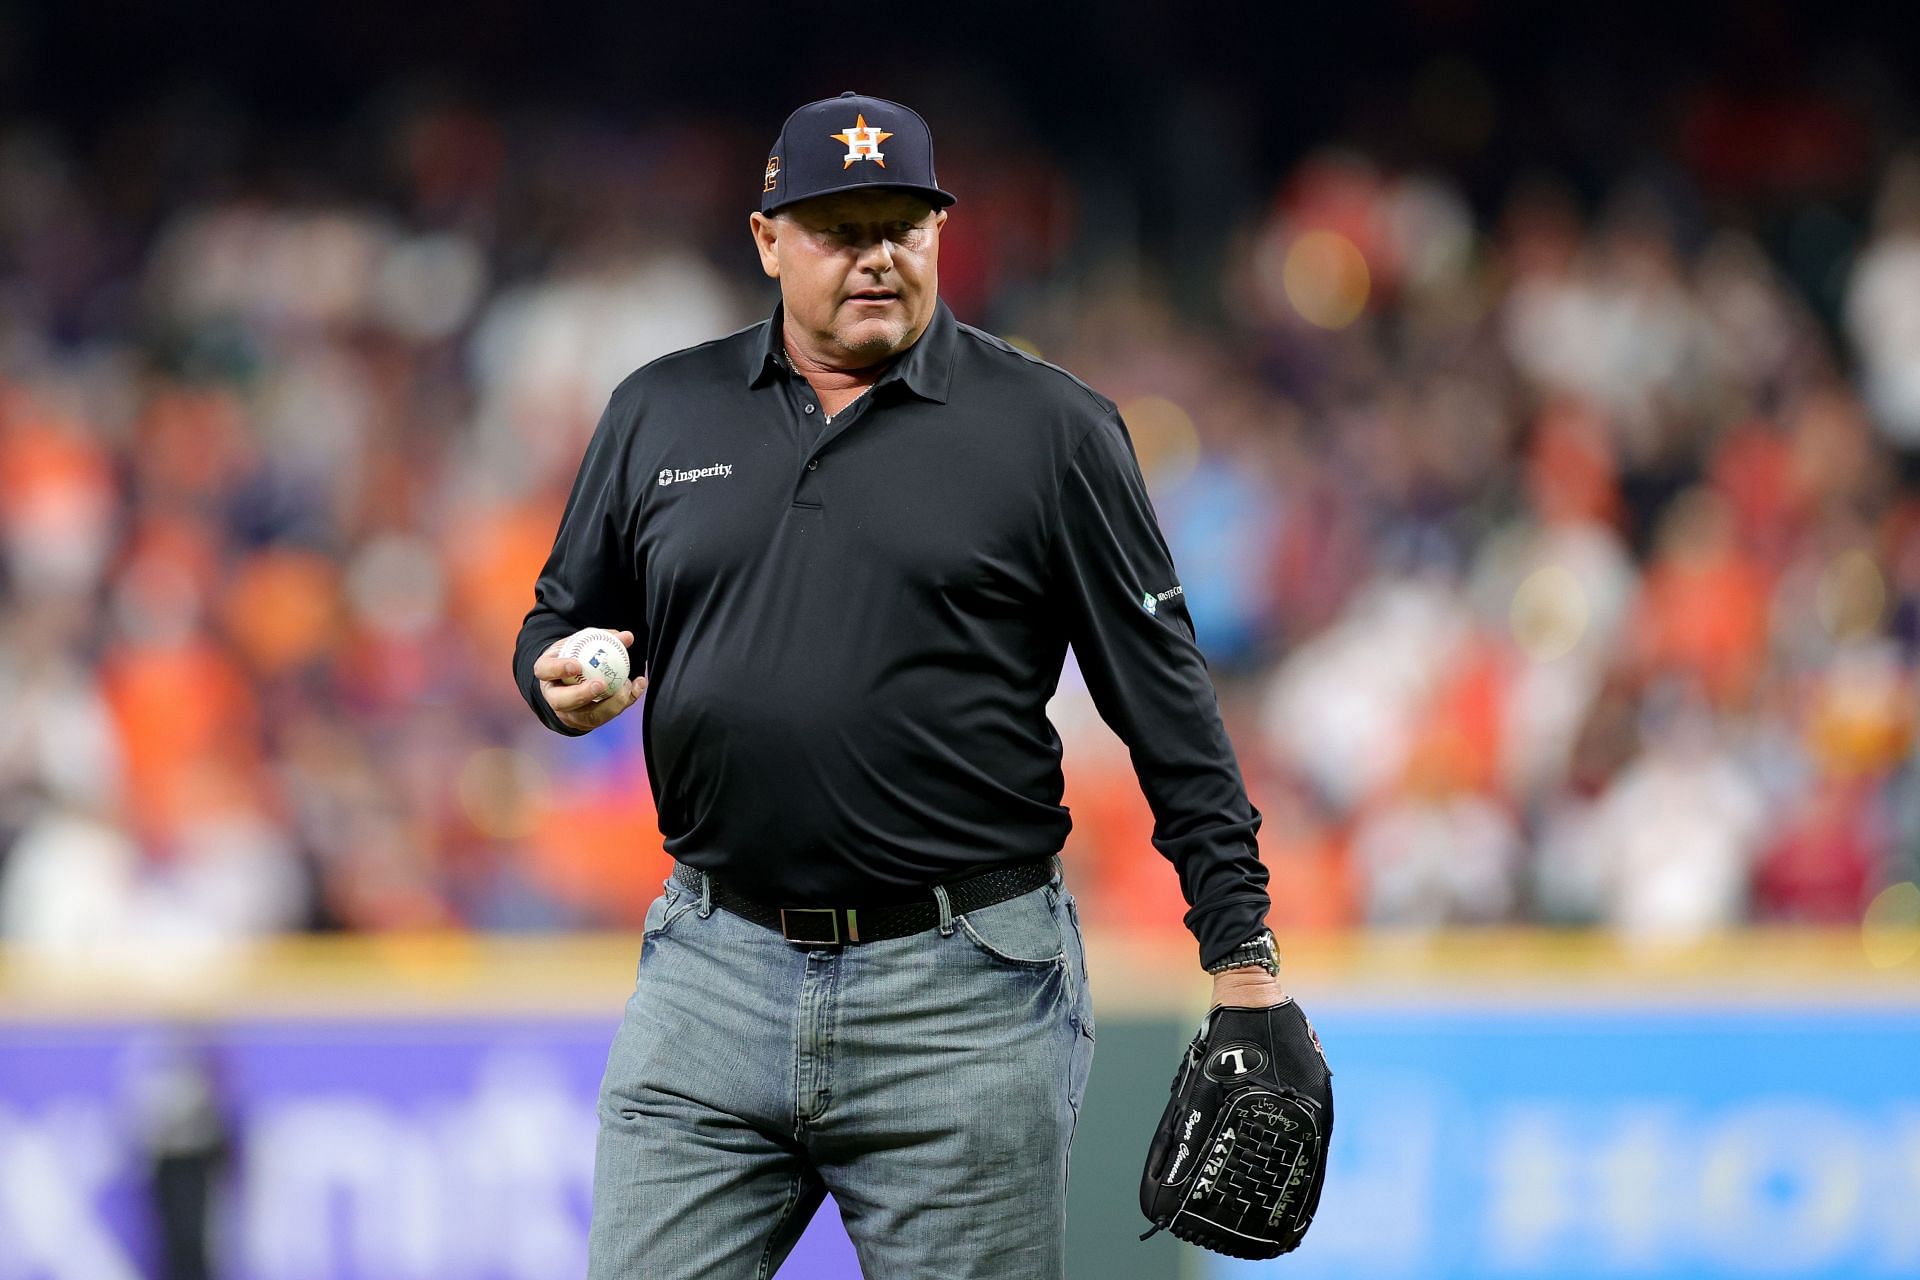 When former Red Sox star Roger Clemens' attorney rejected